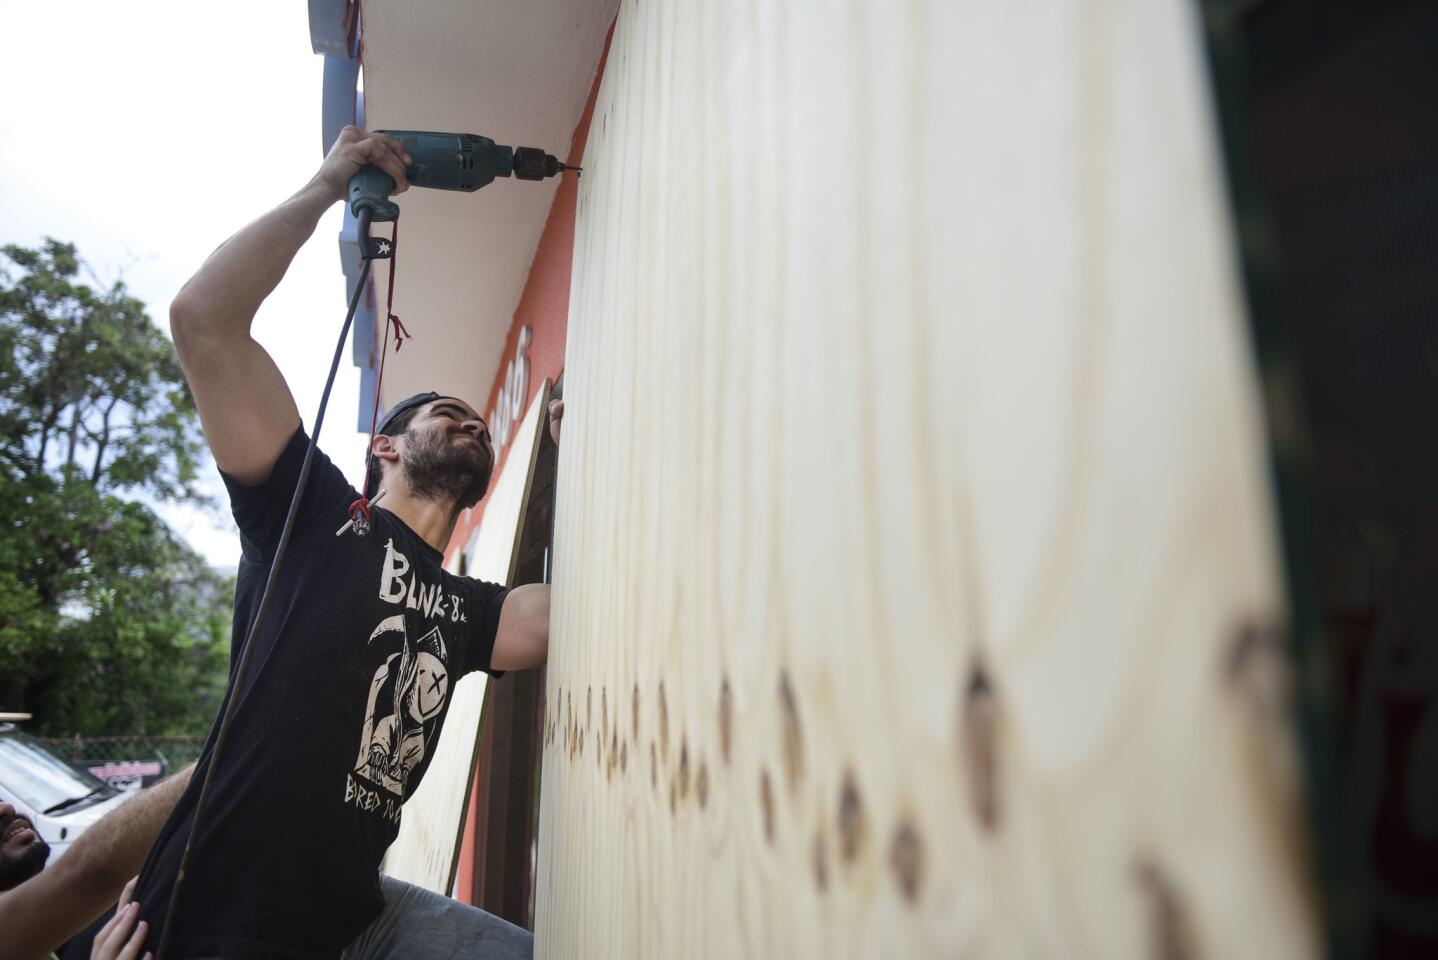 Cyber School Supply employee Christopher Rodriguez installs wood panels on windows in preparation for Hurricane Irma, in Toa Baja, Puerto Rico, Tuesday, Sept. 5, 2017